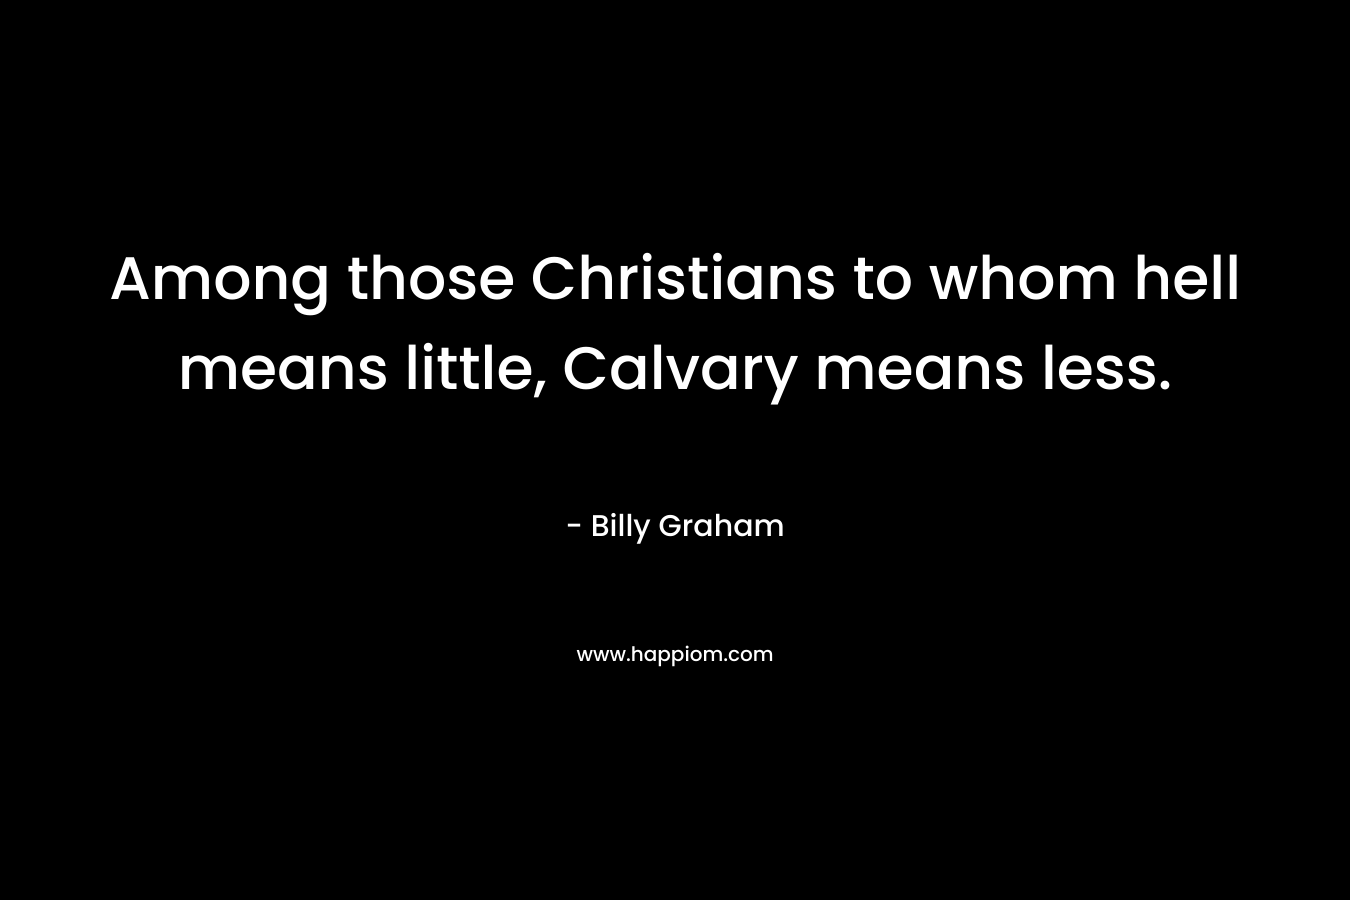 Among those Christians to whom hell means little, Calvary means less.